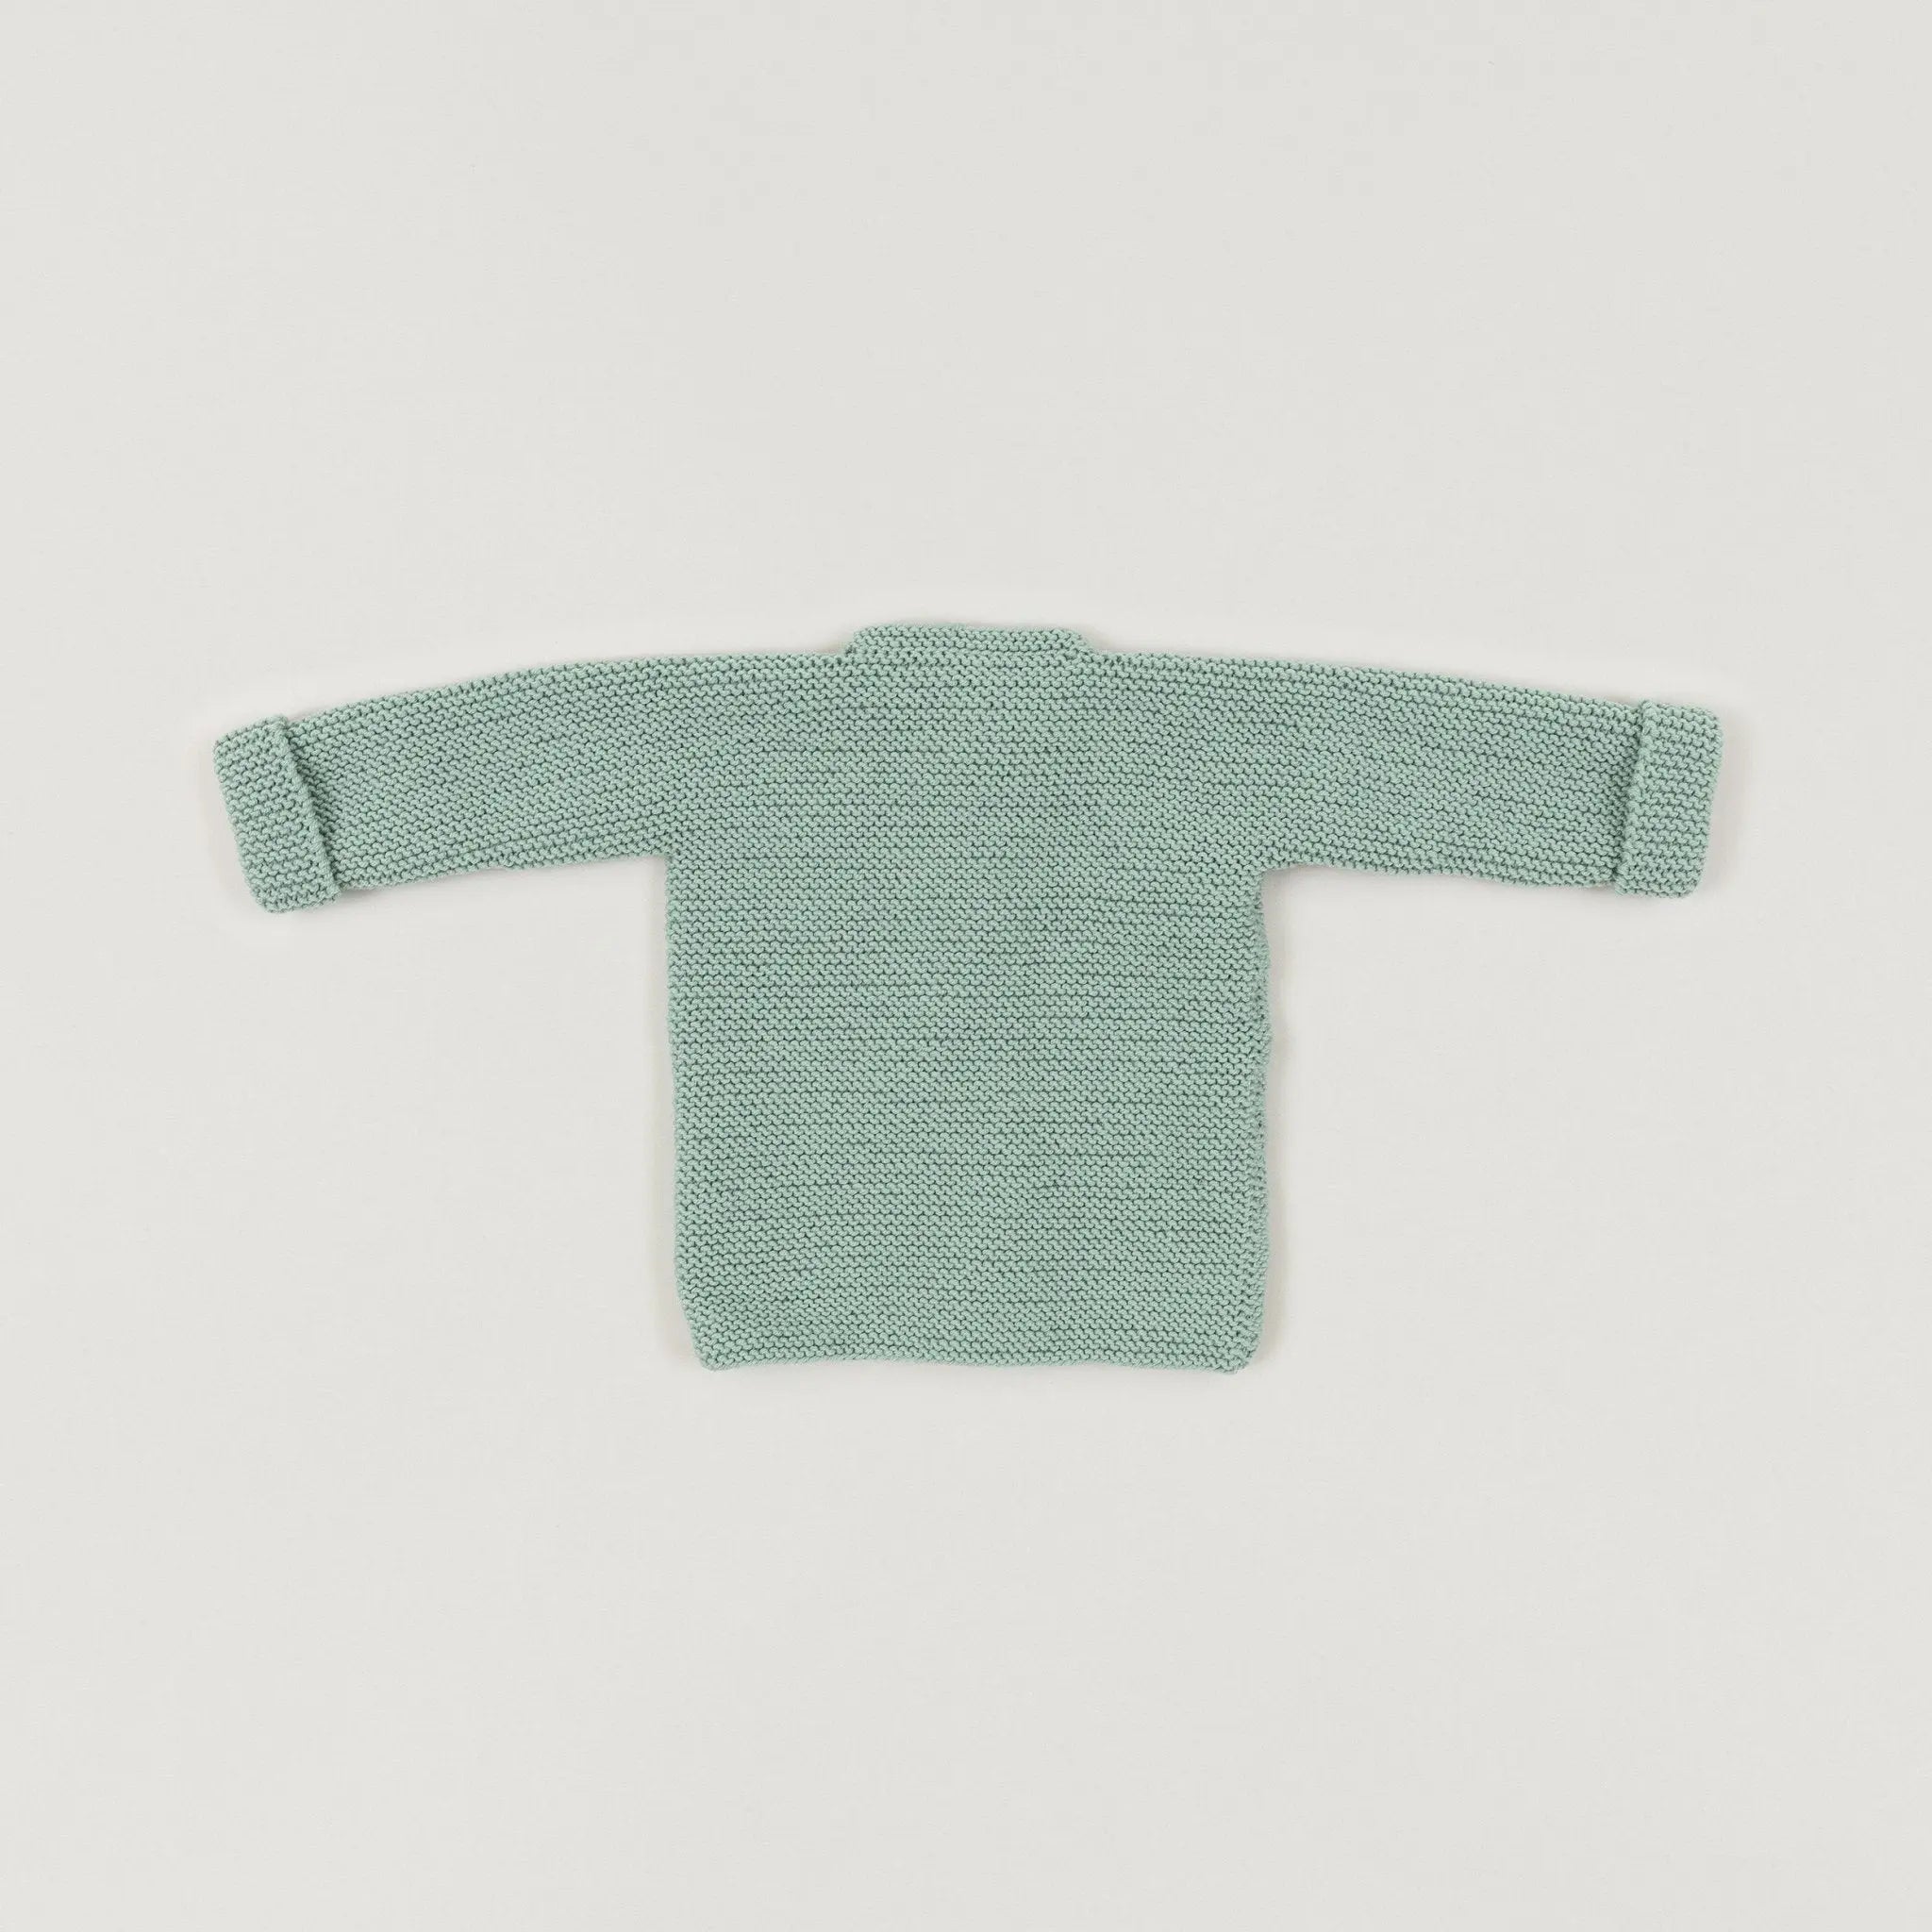 Babybox and Family BabyBox Collection Handmade Strickjacke aus Wolle 0-6m light-sage-bbh #farbe_0-6m